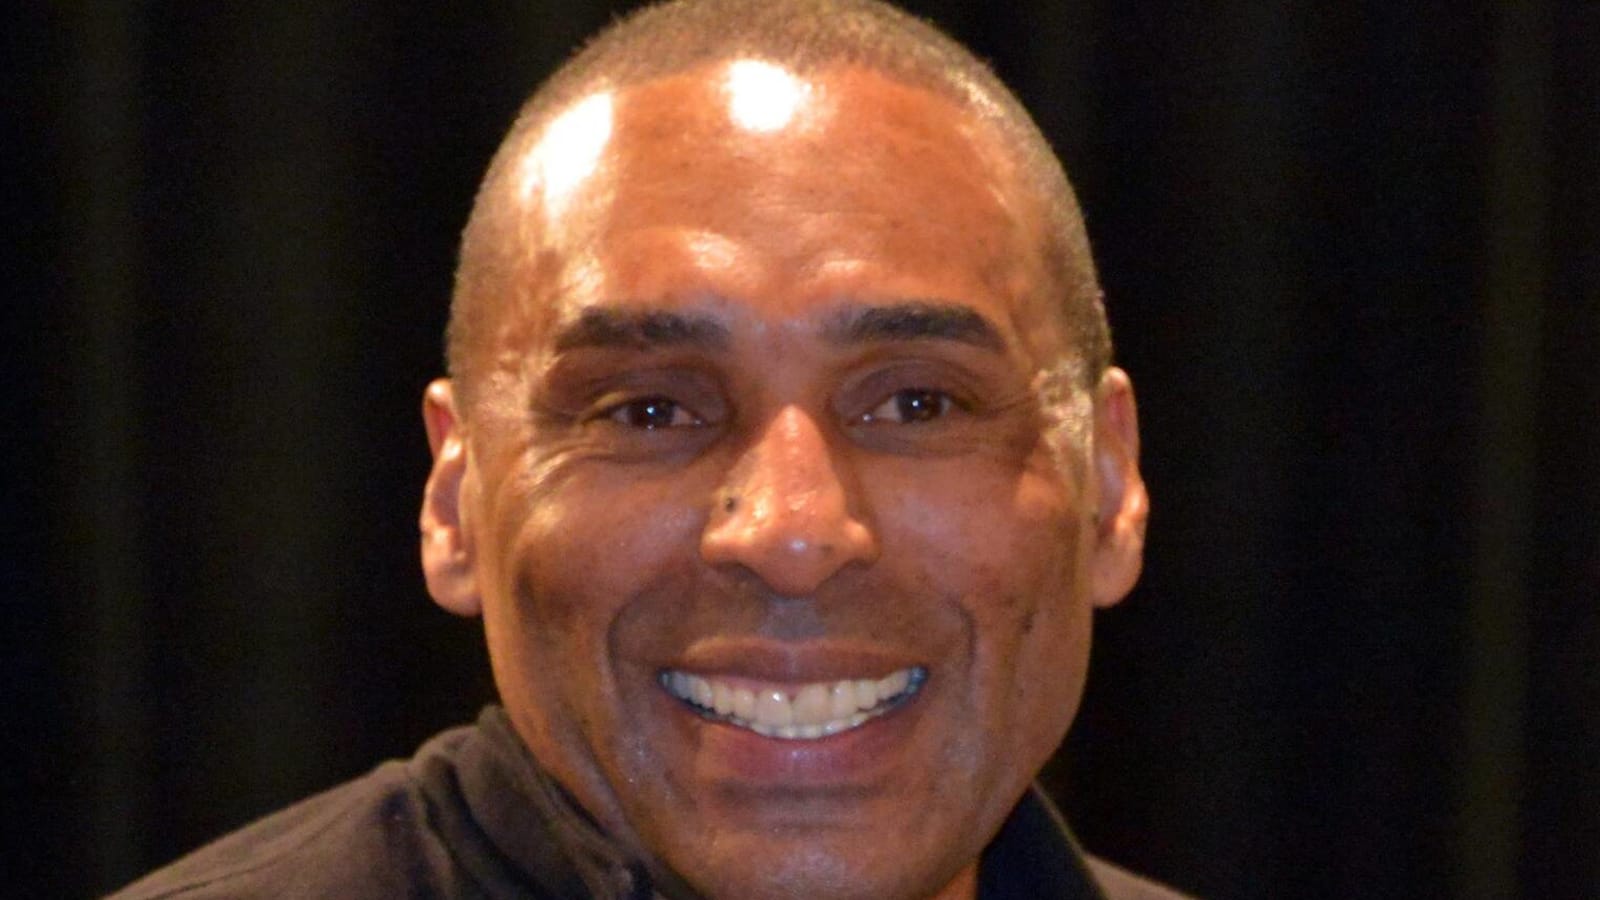 49ers great Roger Craig not chosen for Pro Football Hall of Fame, but there is reason for optimism